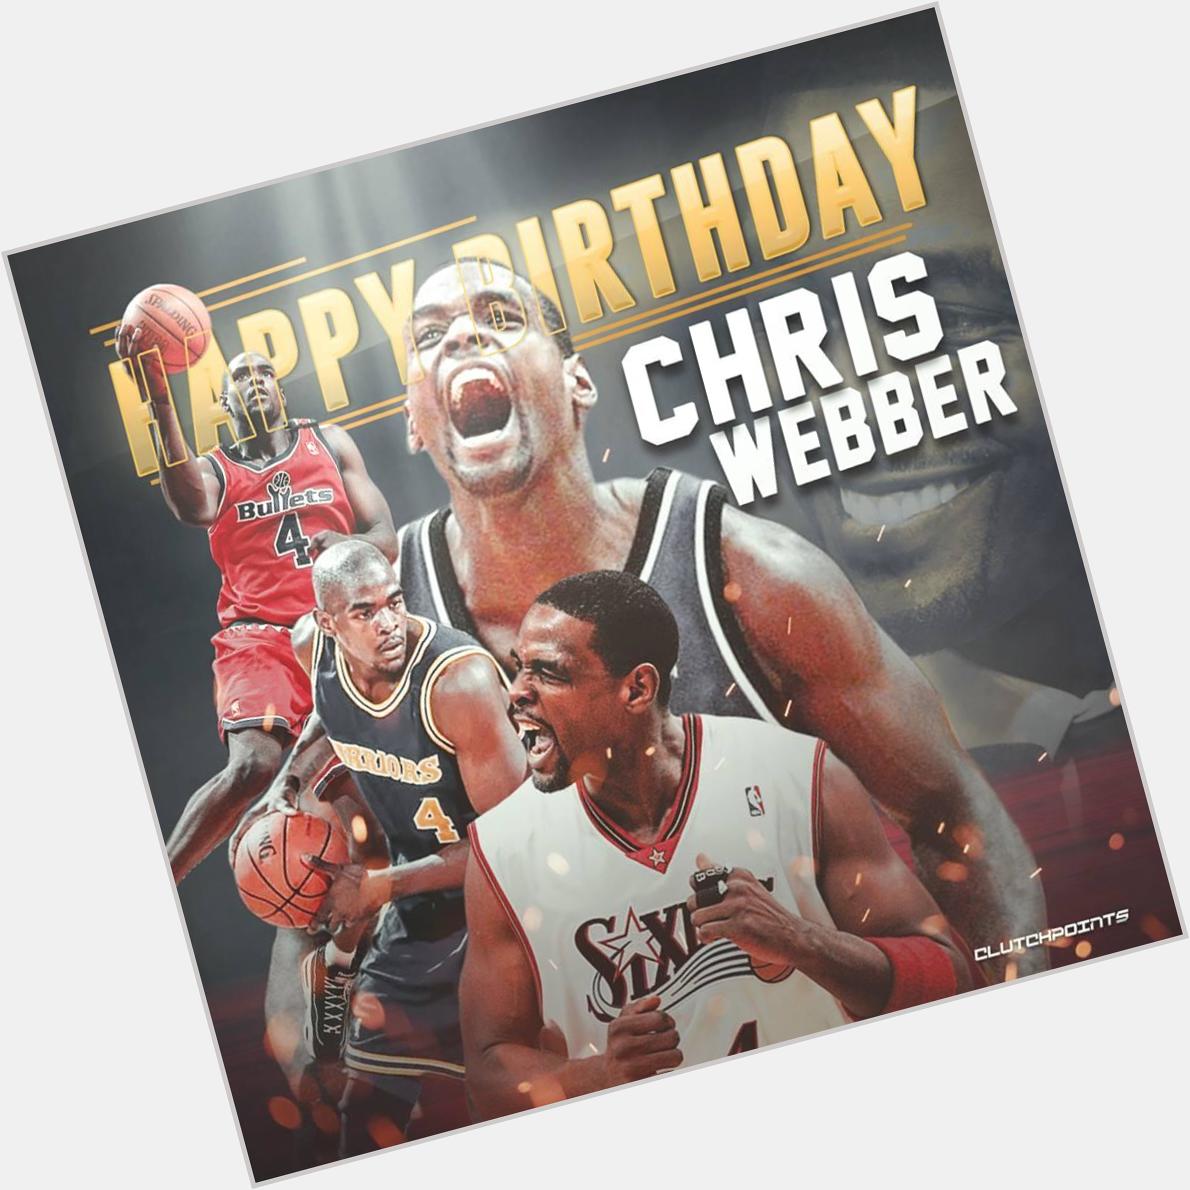 Happy 46th birthday to the 5x NBA All-Star and the 1994 NBA Rookie of the Year, Chris Webber!  